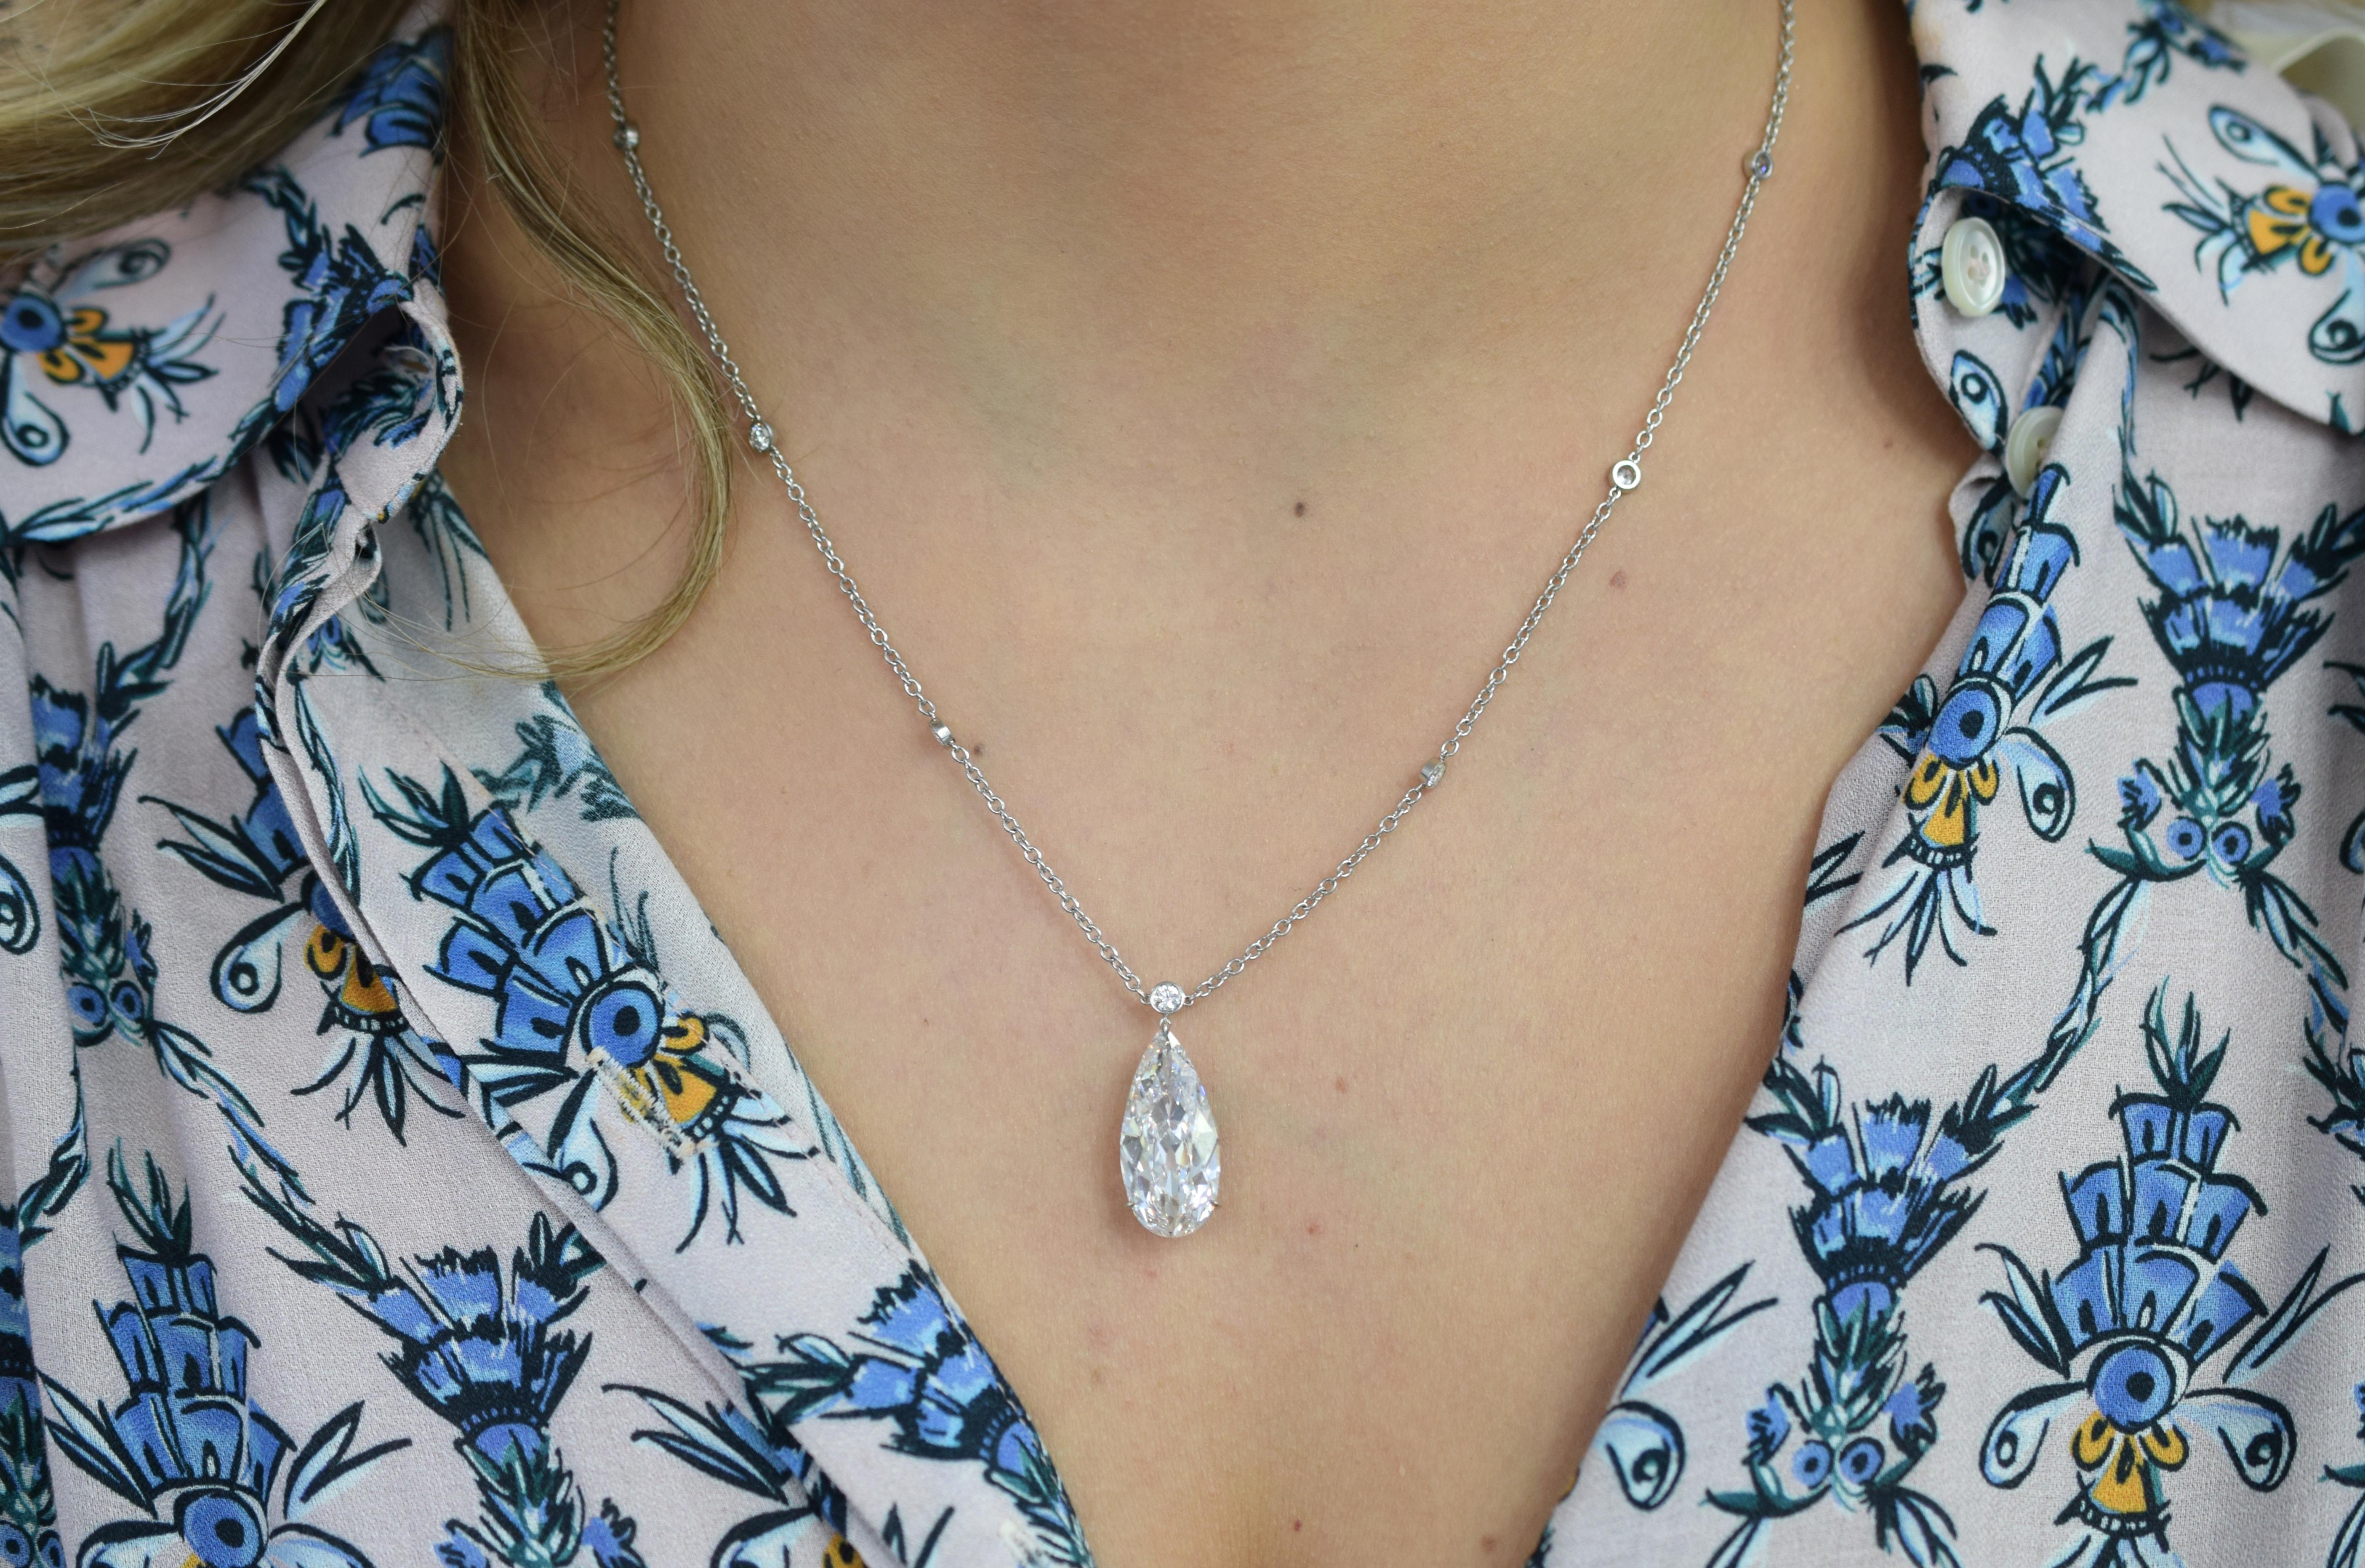 Simply the best!
Harry Winston Diamond pendant necklace. 
GIA certified 10.40carat  Pear Shape Diamond with  Color: D and  Clarity IF ( internally flawless) with GIAi# xxxxxxxx , set with 9 round brilliant cut diamonds, total weight approximatley